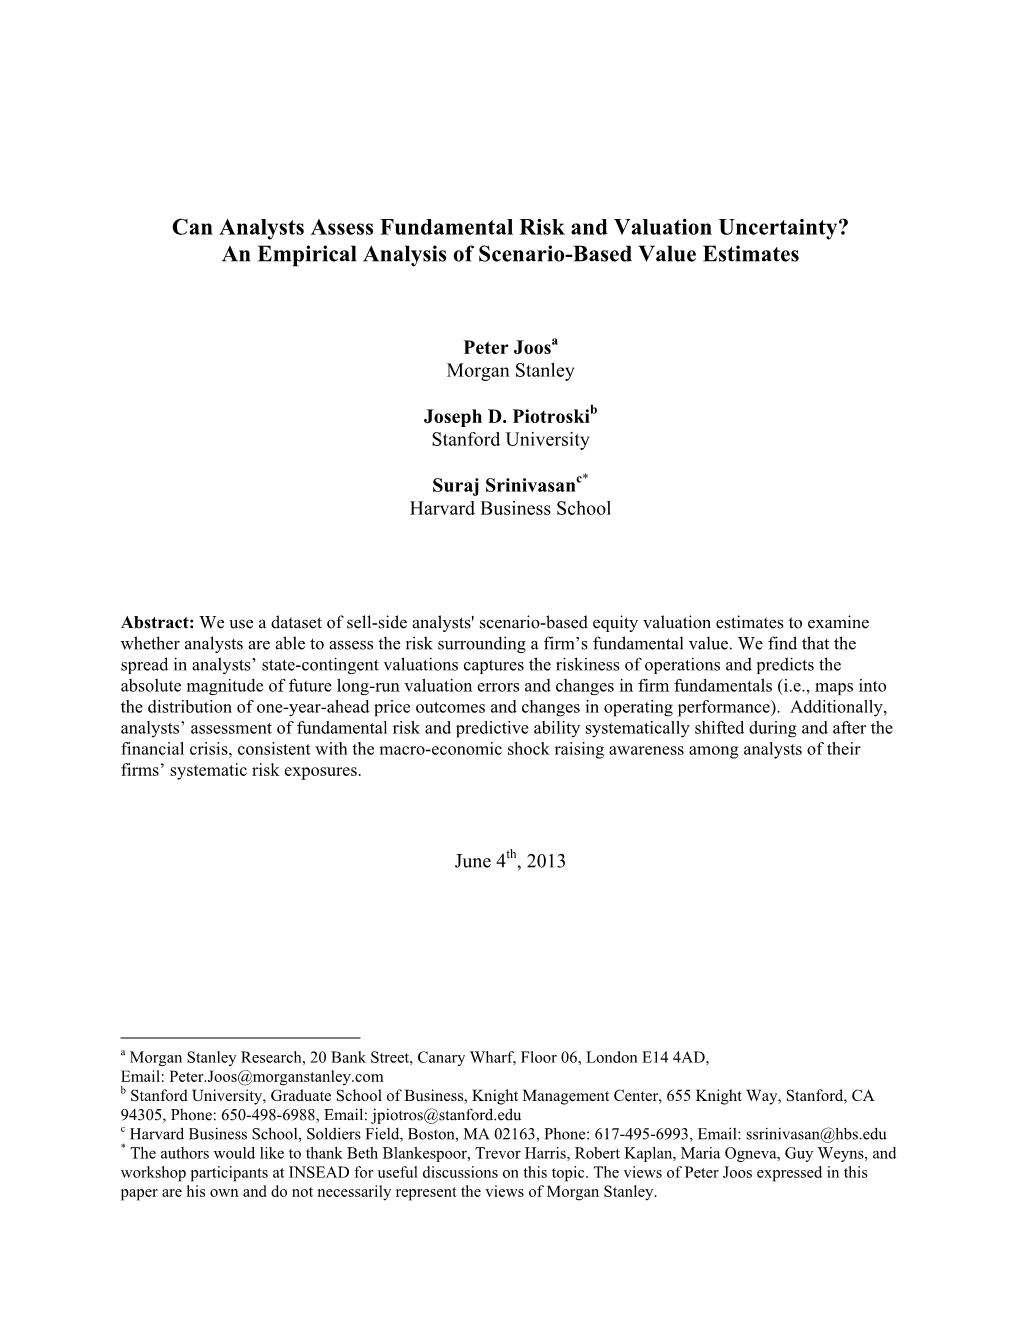 Can Analysts Assess Fundamental Risk and Valuation Uncertainty? an Empirical Analysis of Scenario-Based Value Estimates